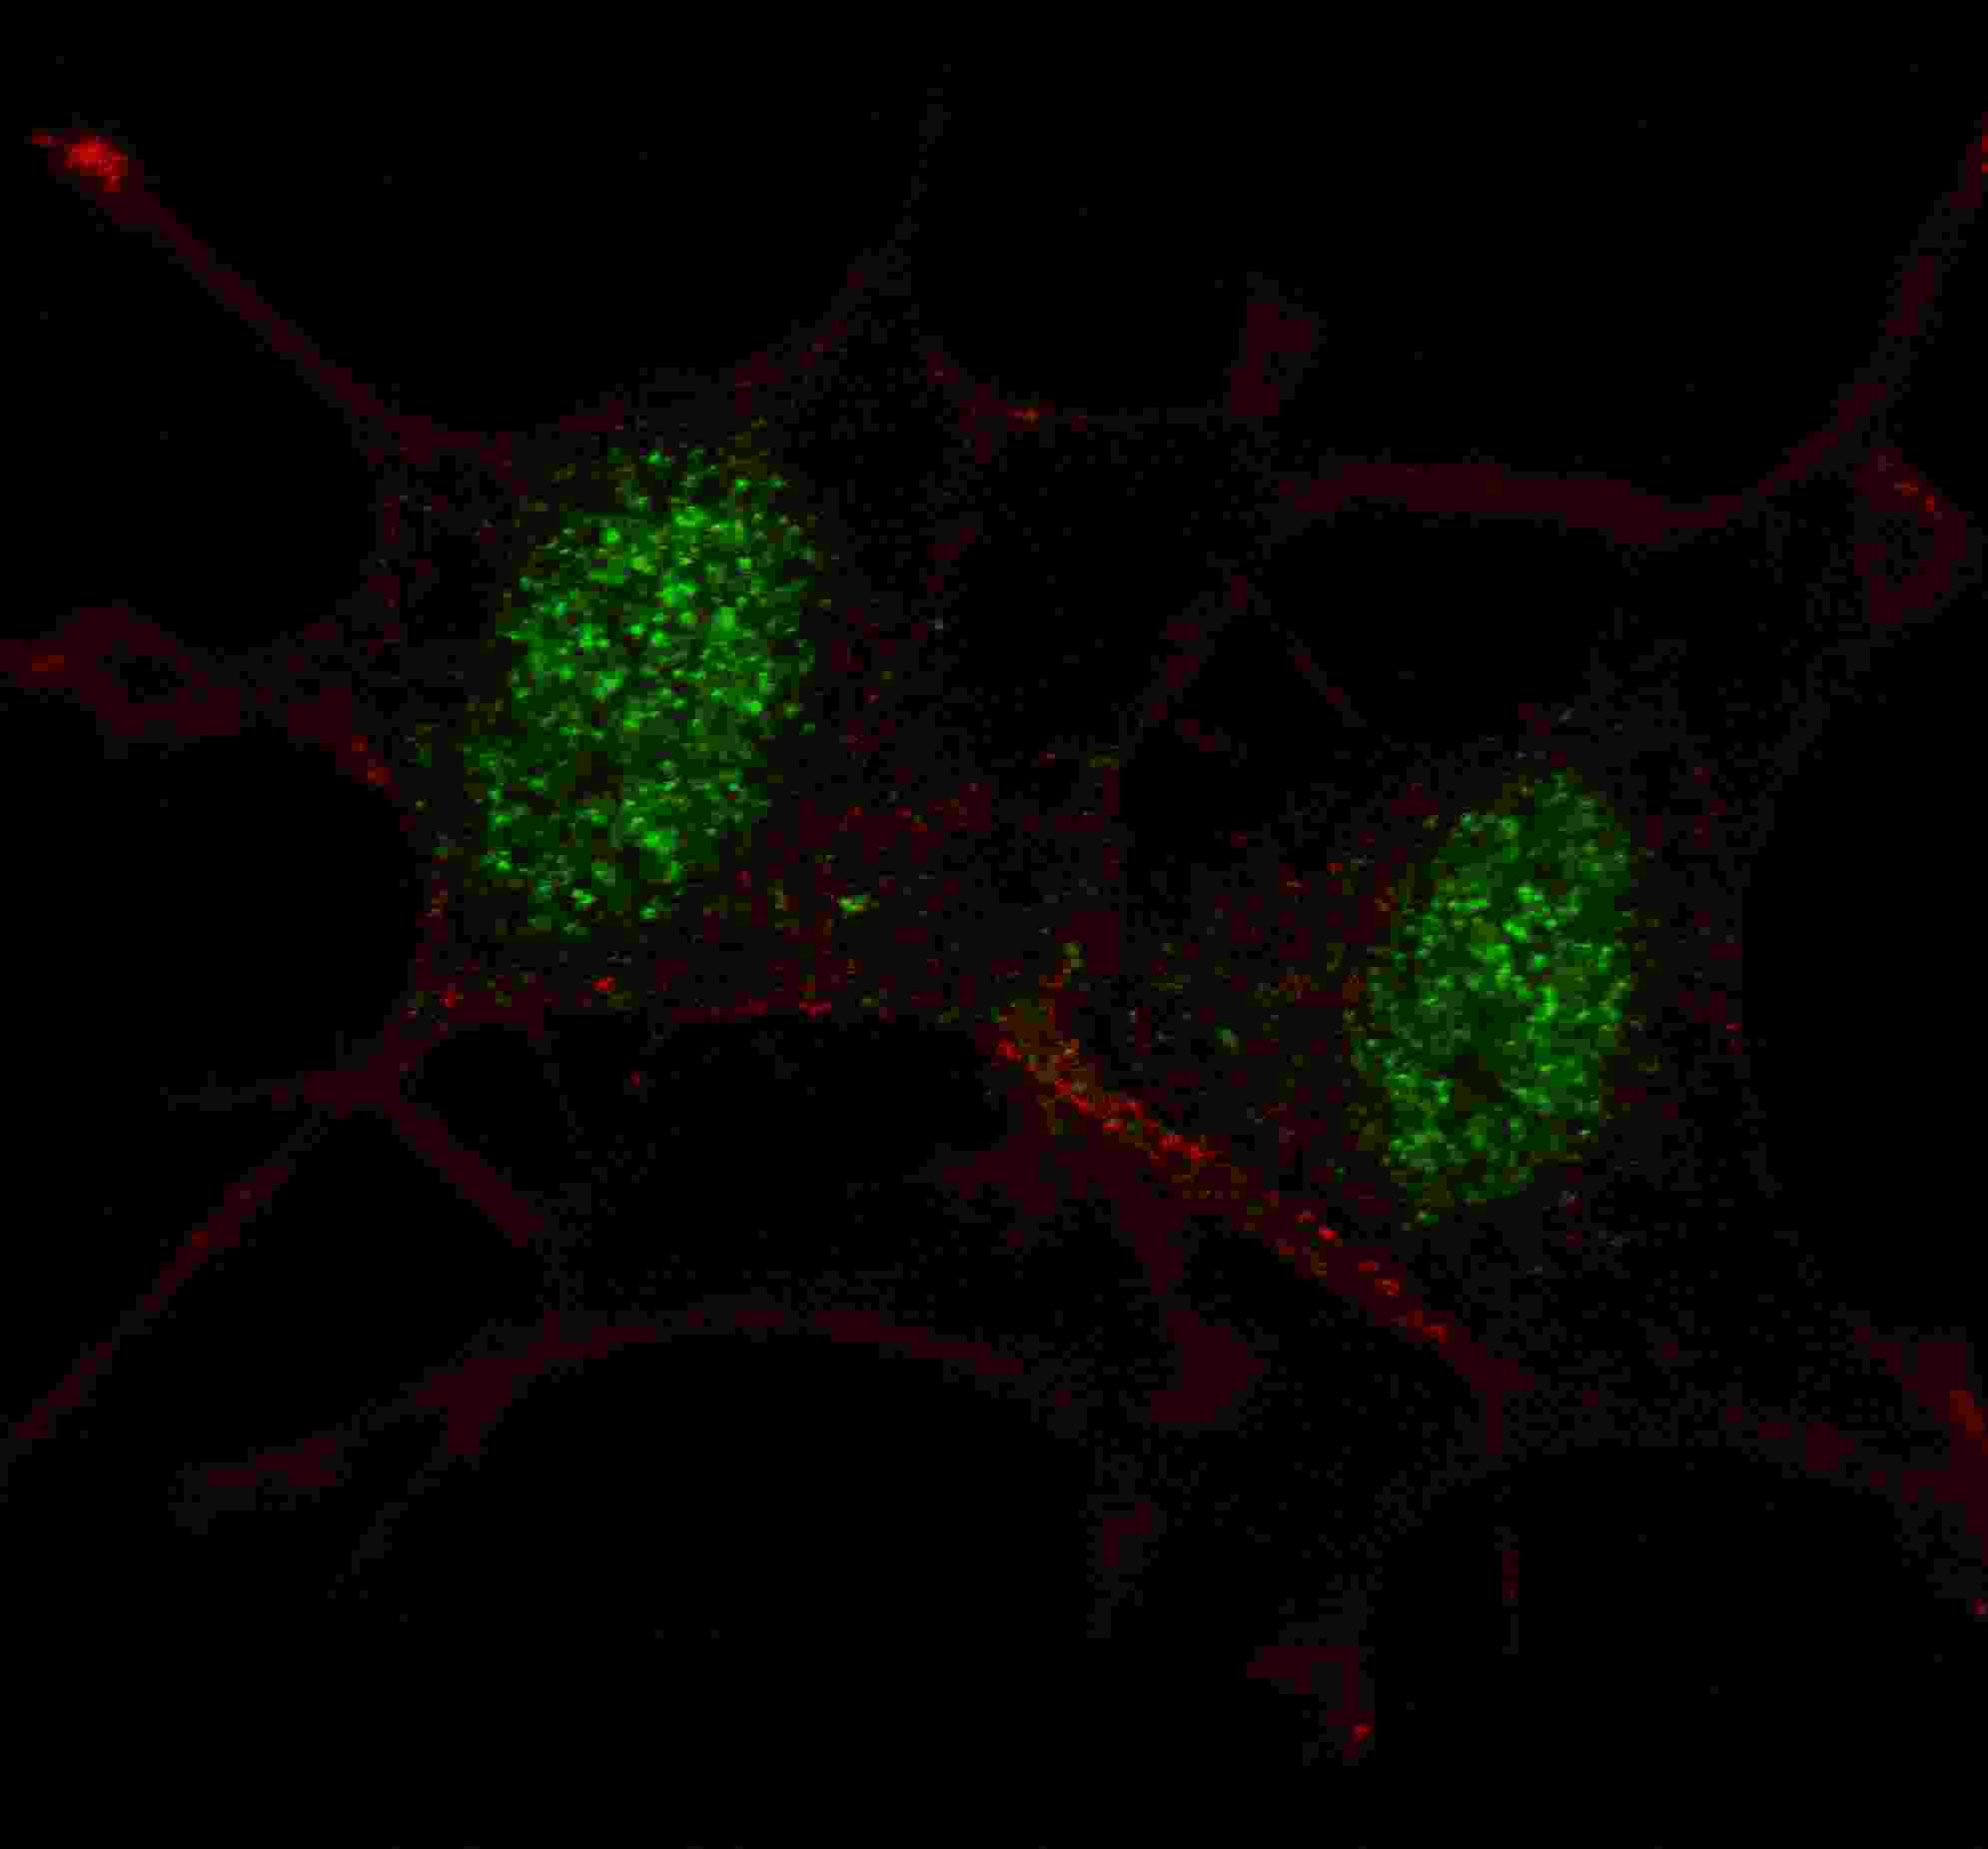 Fluorescent confocal image of SY5Y cells stained with SMAD2 antibody. SY5Y cells were fixed with 4% PFA (20 min), permeabilized with Triton X-100 (0.2%, 30 min). Cells were then incubated with AP7365a SMAD2 primary antibody (1:100, 2 h at room temperature). For secondary antibody, Alexa Fluor� 488 conjugated donkey anti-rabbit antibody (green) was used (1:1000, 1h). Nuclei were counterstained with Hoechst 33342 (blue) (10 ?g/ml, 5 min). Note the highly specific localization of the SMAD2 mainly to the nucleus.